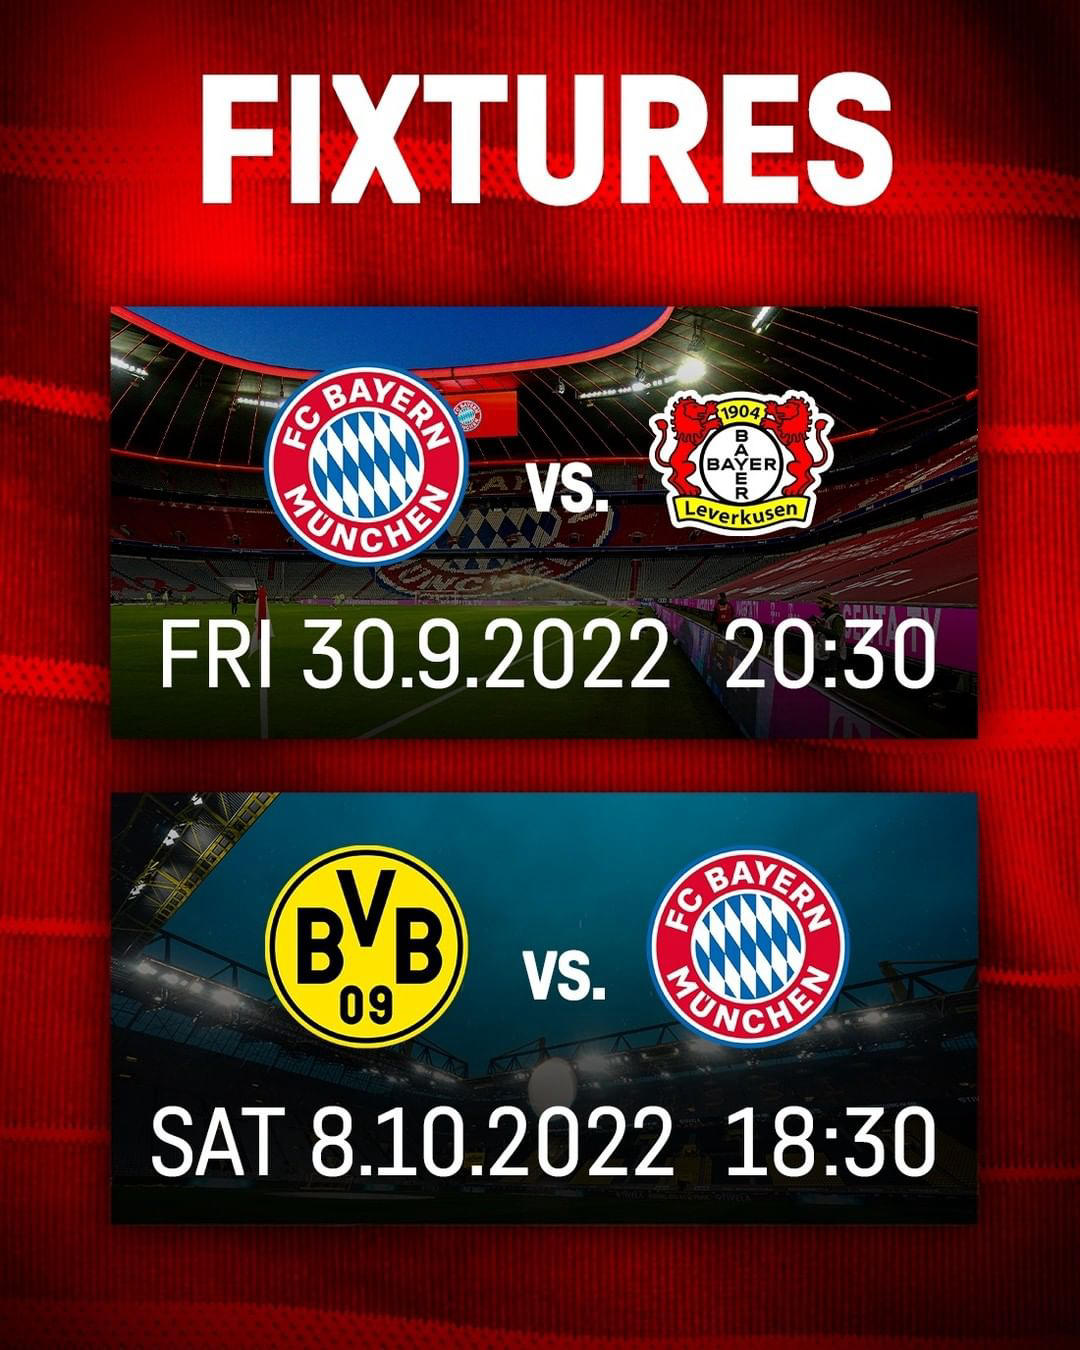 FC Bayern - Our #Bundesliga fixtures 8 and 9 have been scheduled